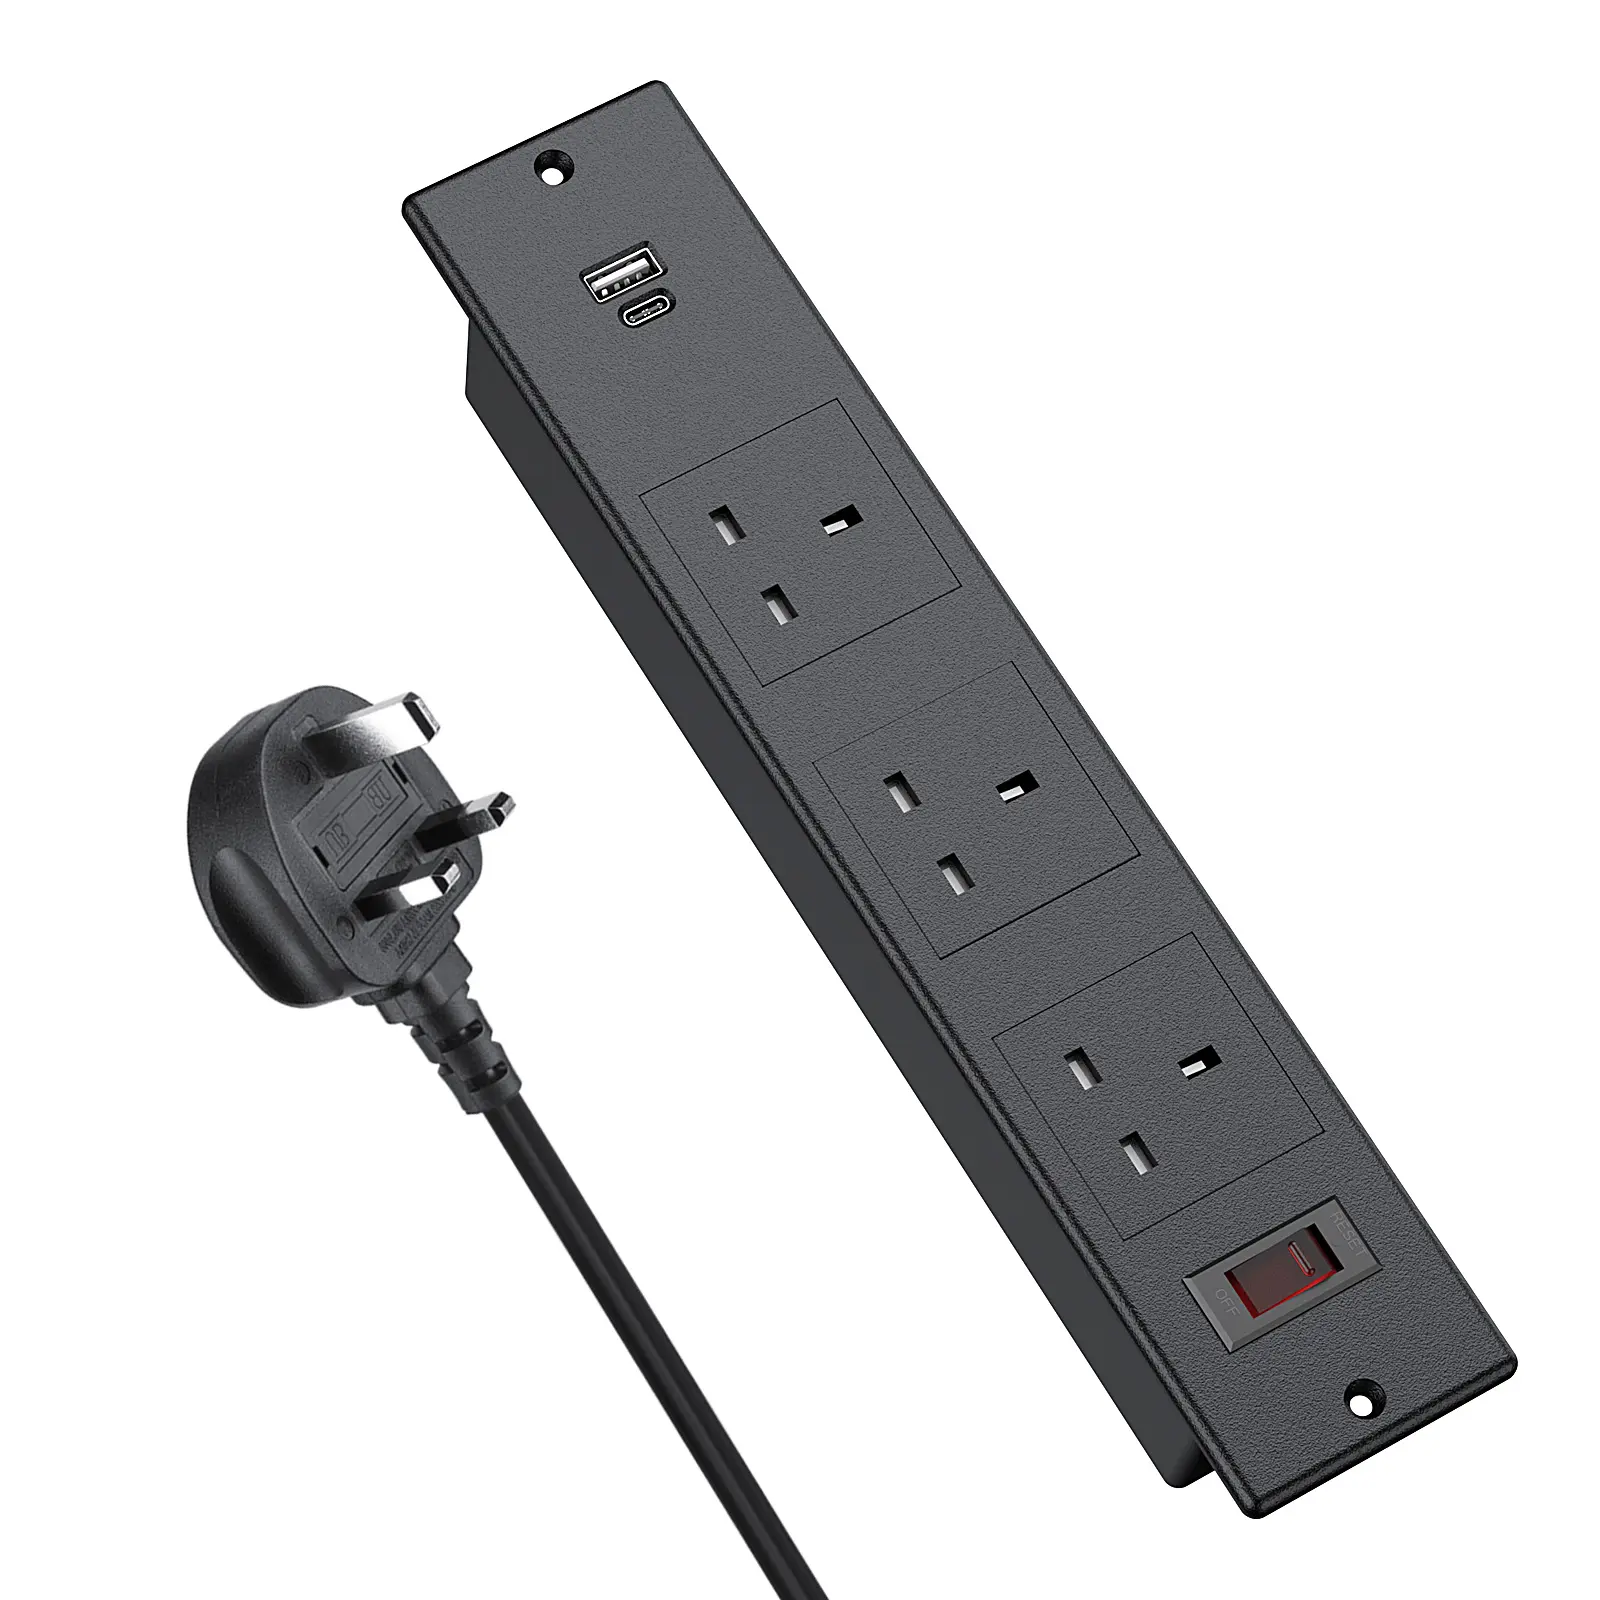 5 IN I RECESSED POWER STRIP A C I5W USB-LADEPORTE 3250J SURGE PROTECTION UK Steckdose